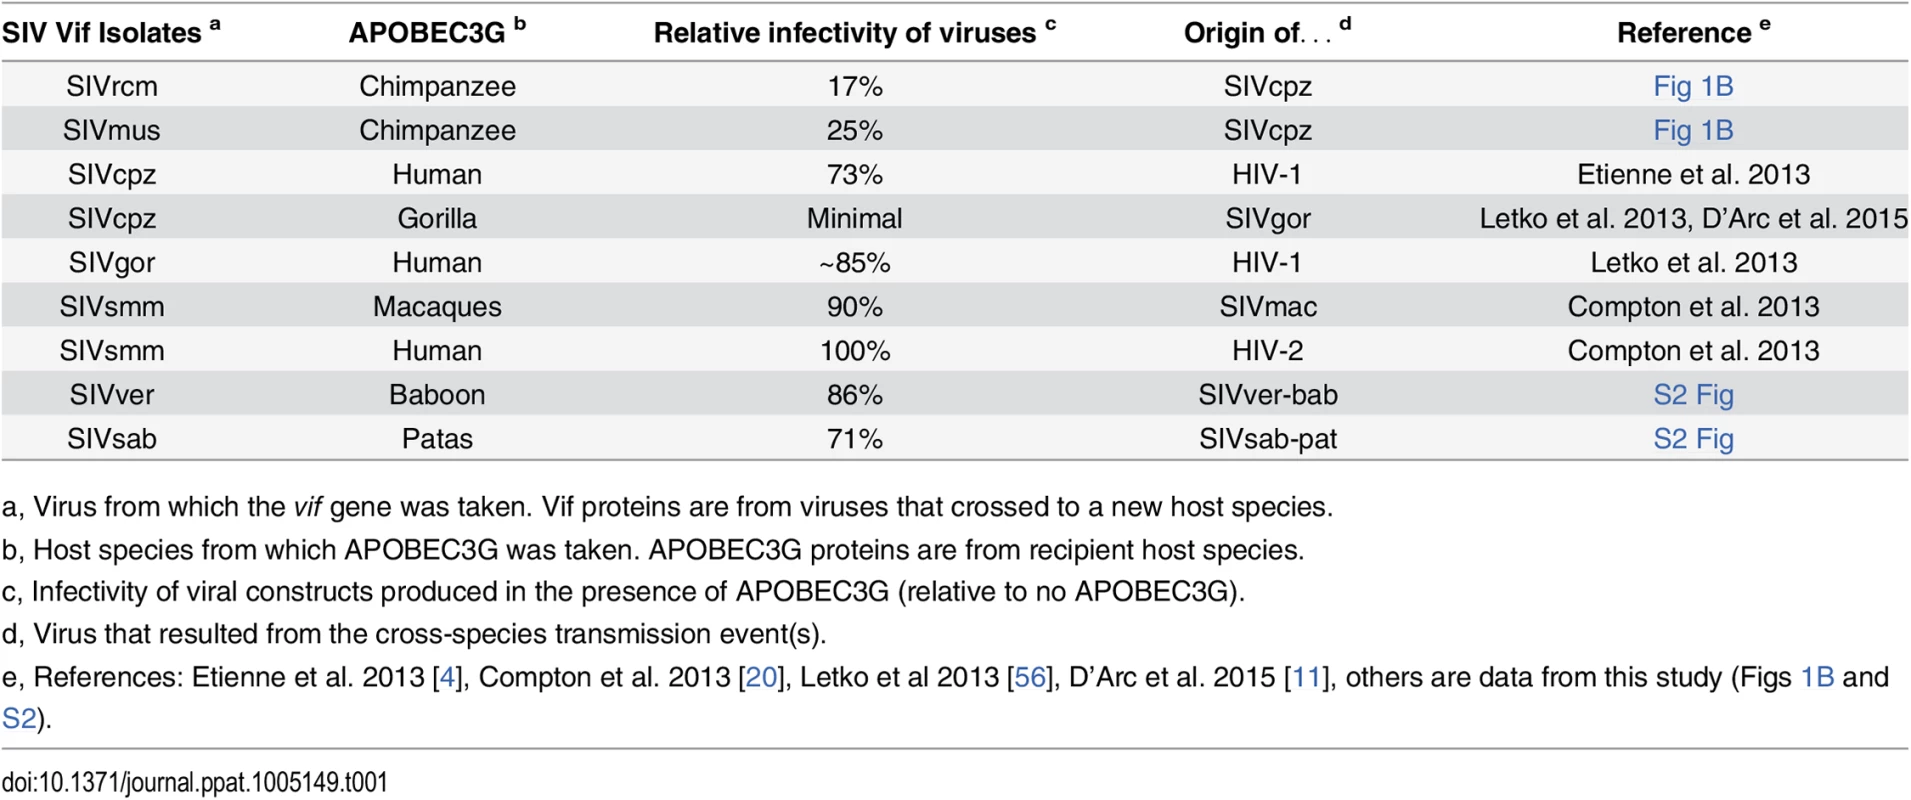 All viruses that naturally jumped the species barrier had some capacity to antagonize the new species APOBEC3G.